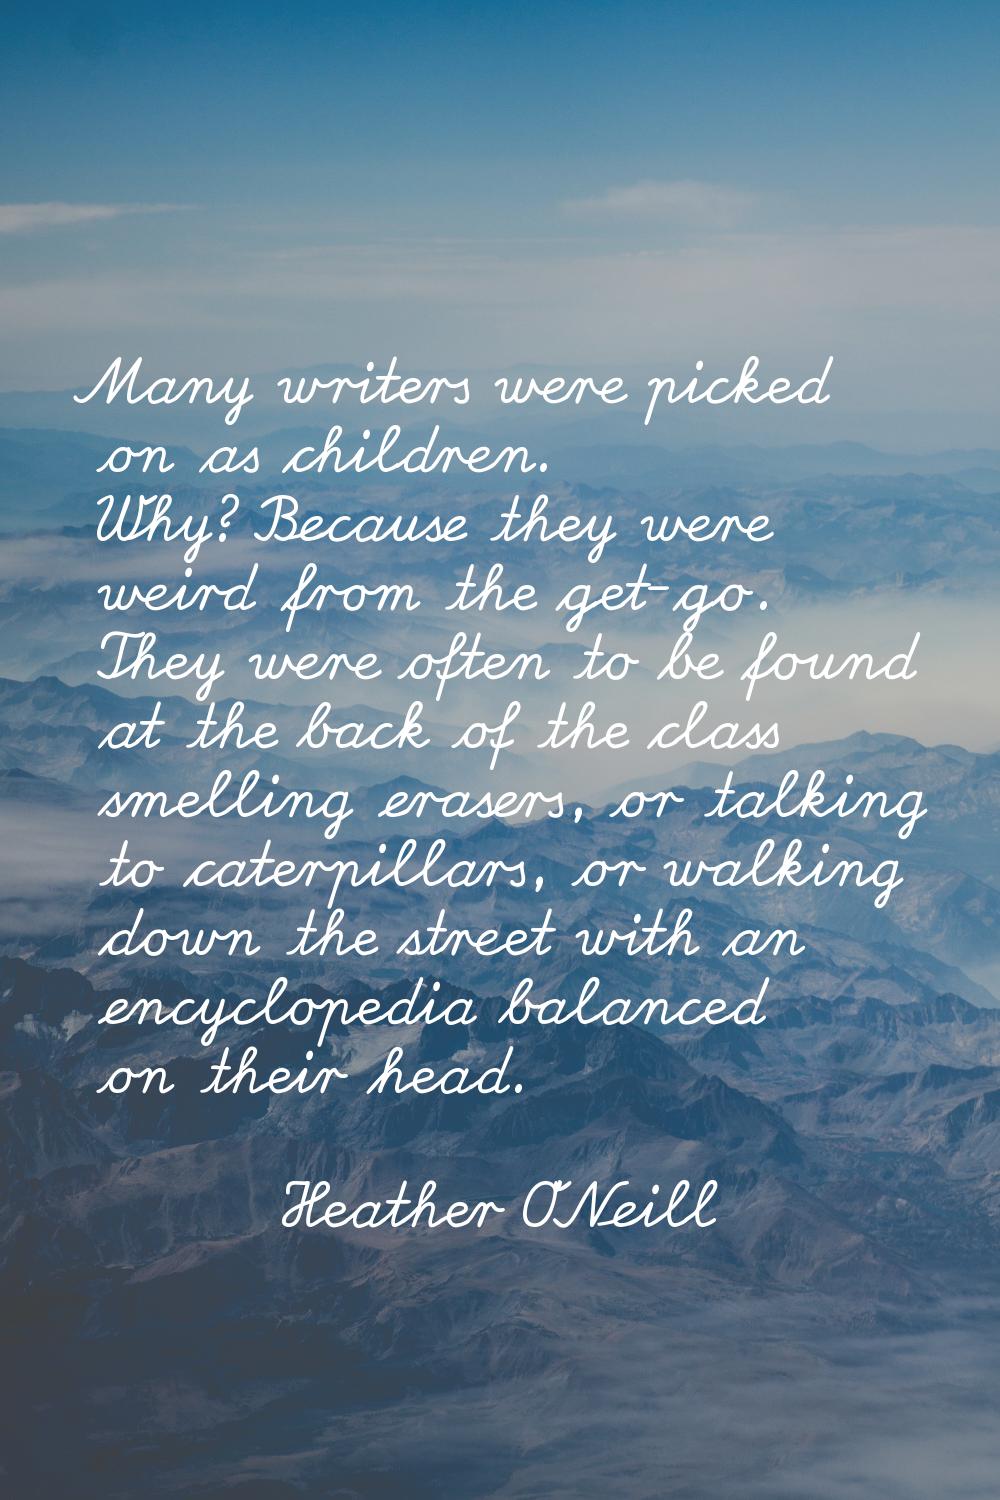 Many writers were picked on as children. Why? Because they were weird from the get-go. They were of